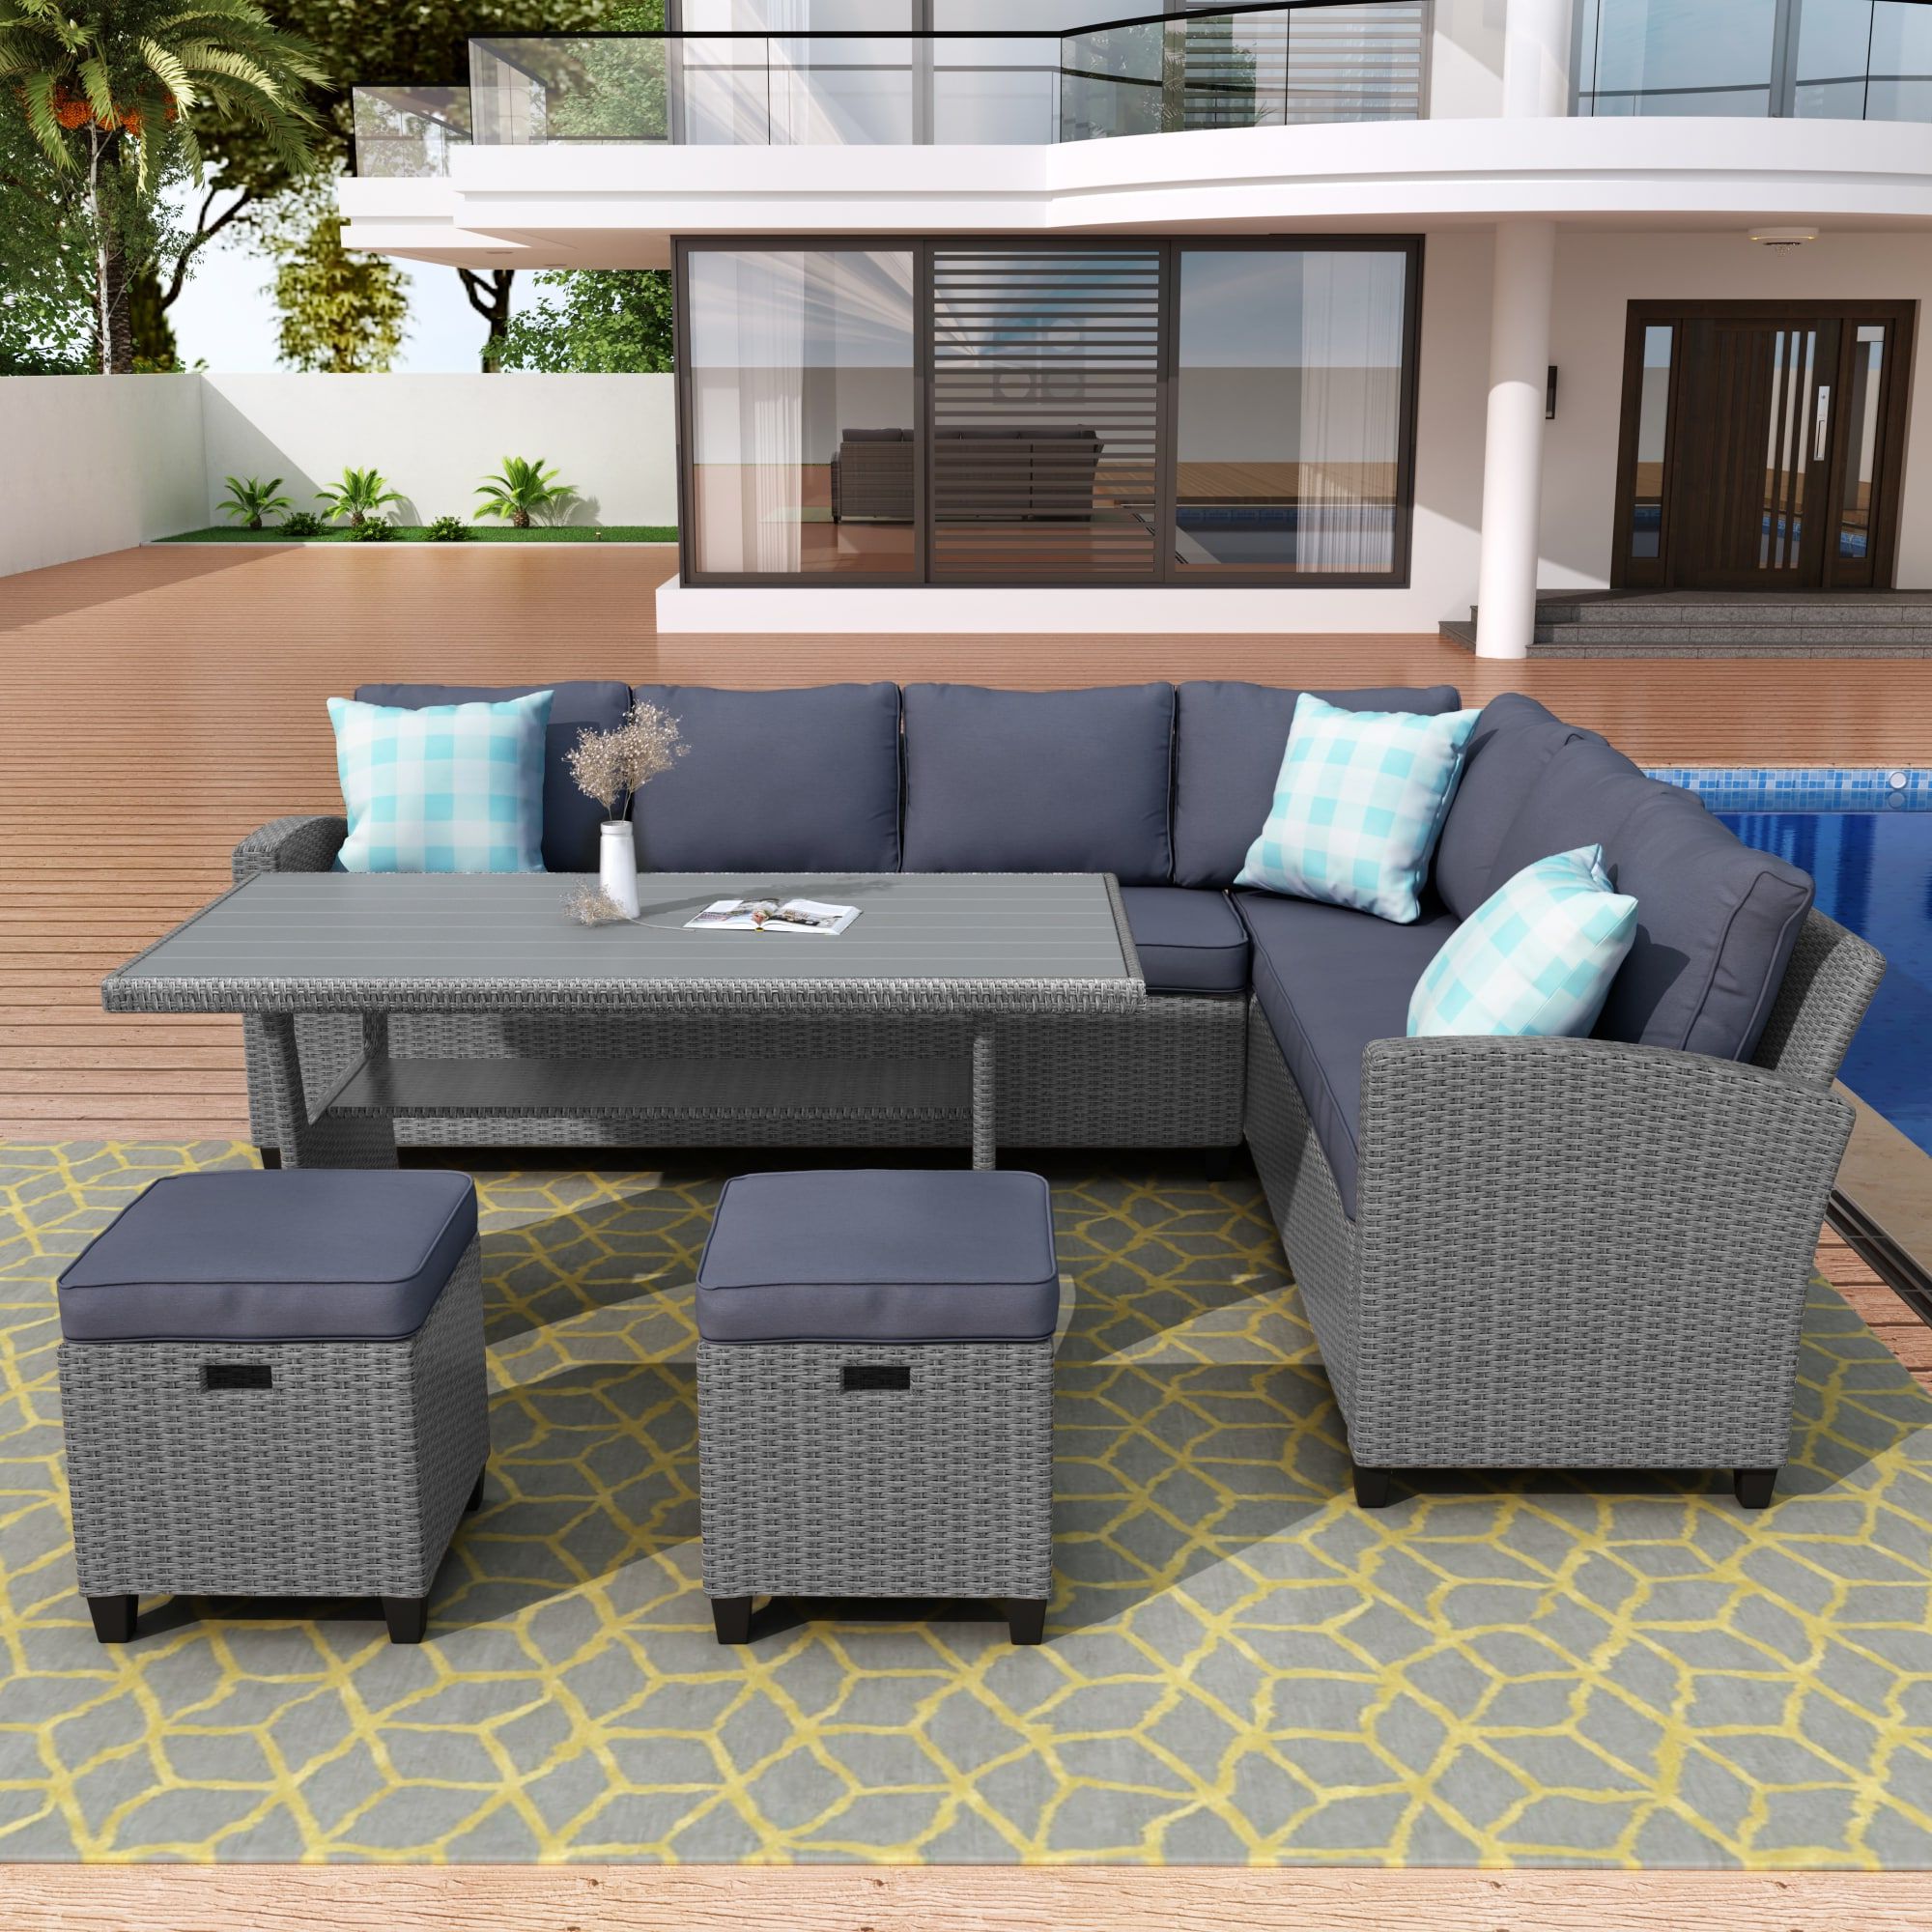 5 Piece Patio Conversation Set For Preferred Clihome 5 Piece Patio Conversation Set 5 Piece Rattan Patio Conversation Set  With Gray Cushions In The Patio Conversation Sets Department At Lowes (Photo 4 of 16)